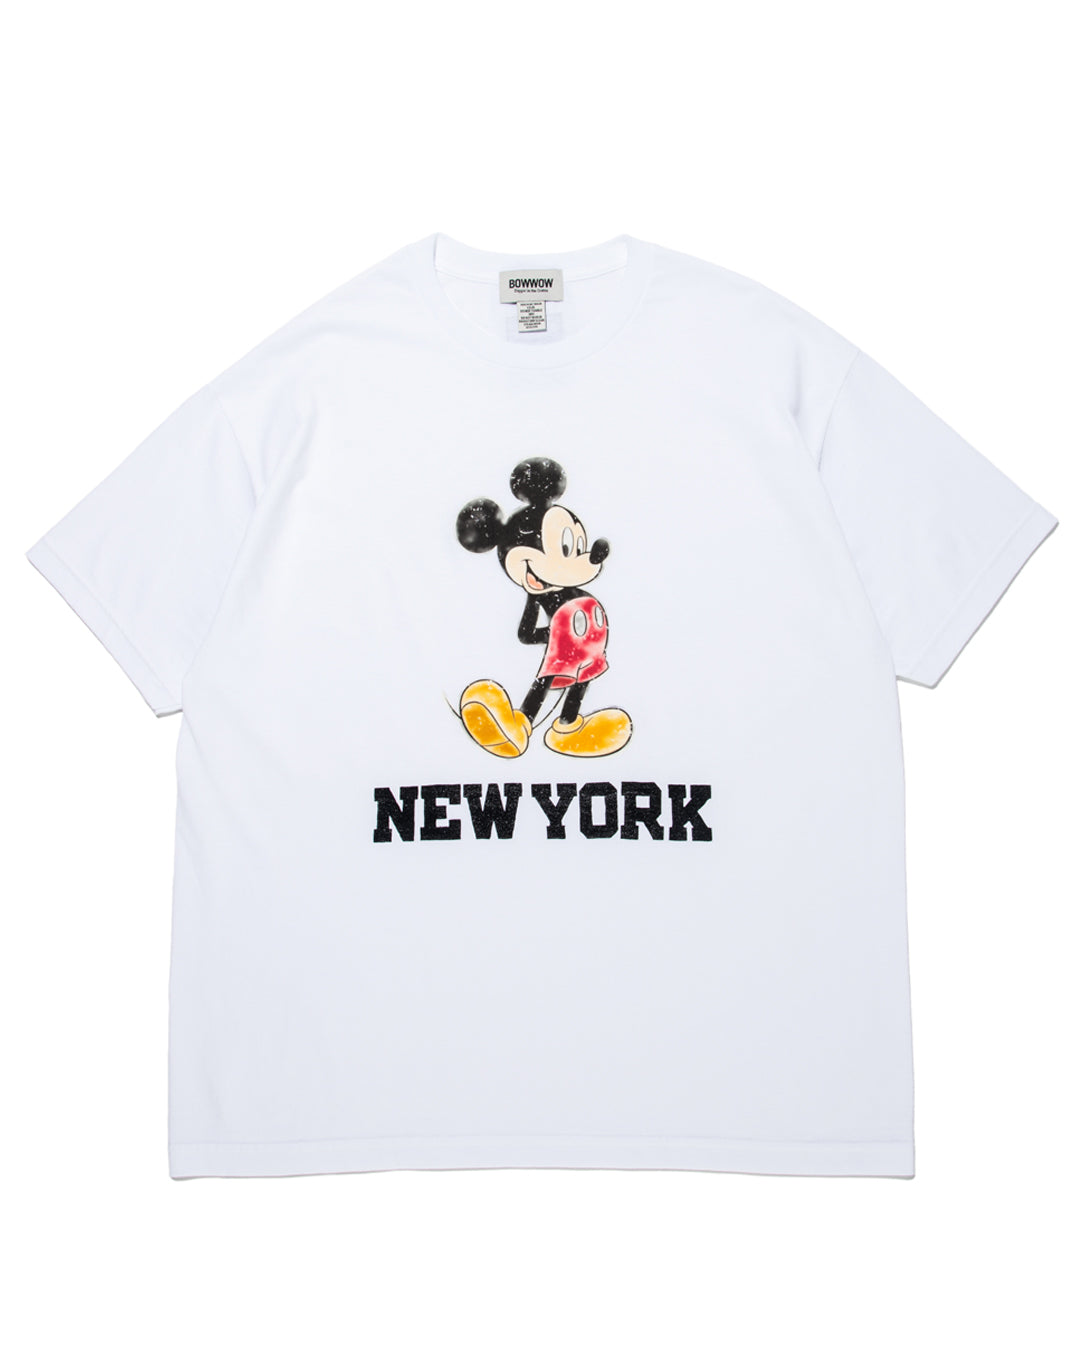 BOW WOW×RECOGNIZE MICKEY MOUSE NEW YORK TEE